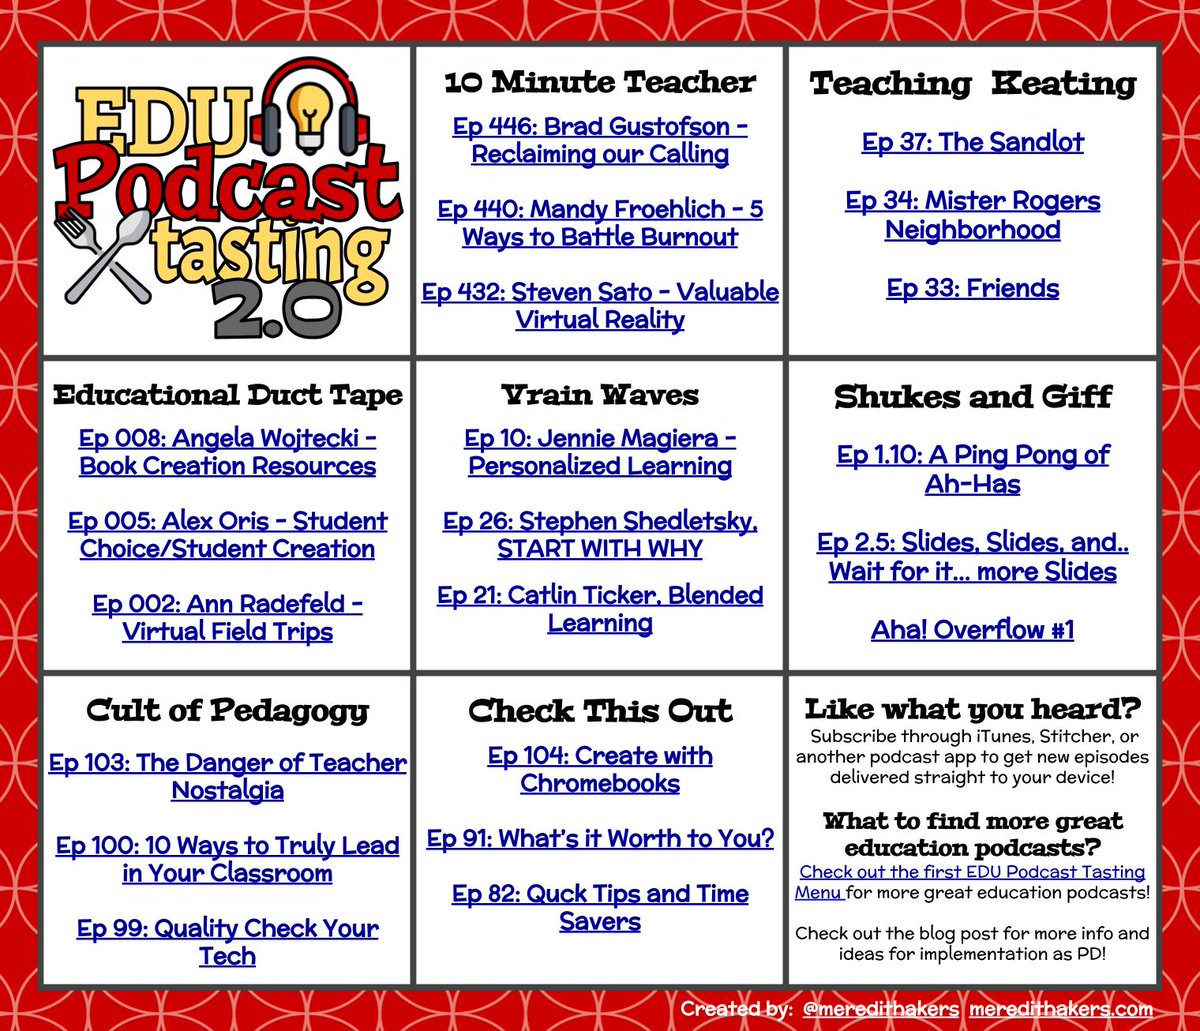 Edu Podcast Tasting 2.0 ! Click the link and take a listen to some great #edupodcasts ! Personalize your learning on your time! 
docs.google.com/drawings/d/1HE…